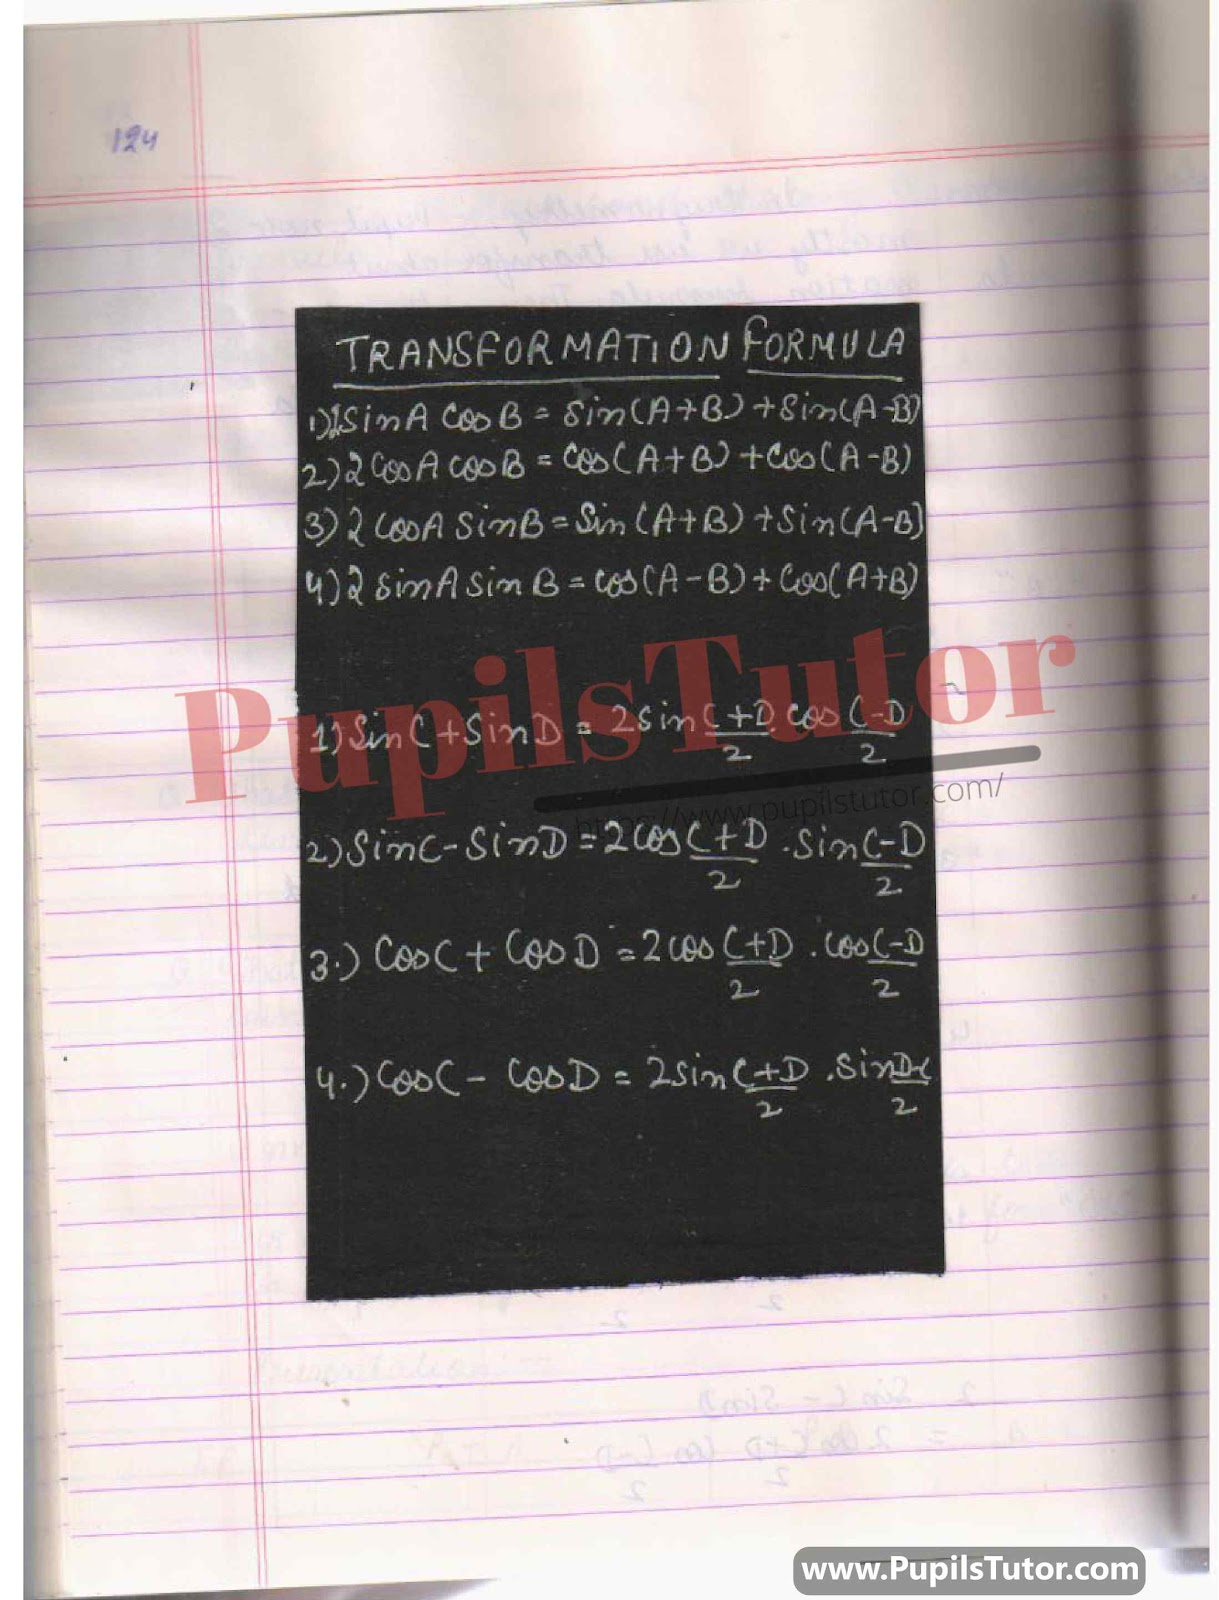 How To Make Mathematics Lesson Plan For Class 10 To 12 On Transformation Formula In Trigonometry In English – [Page And Photo 4] – pupilstutor.com